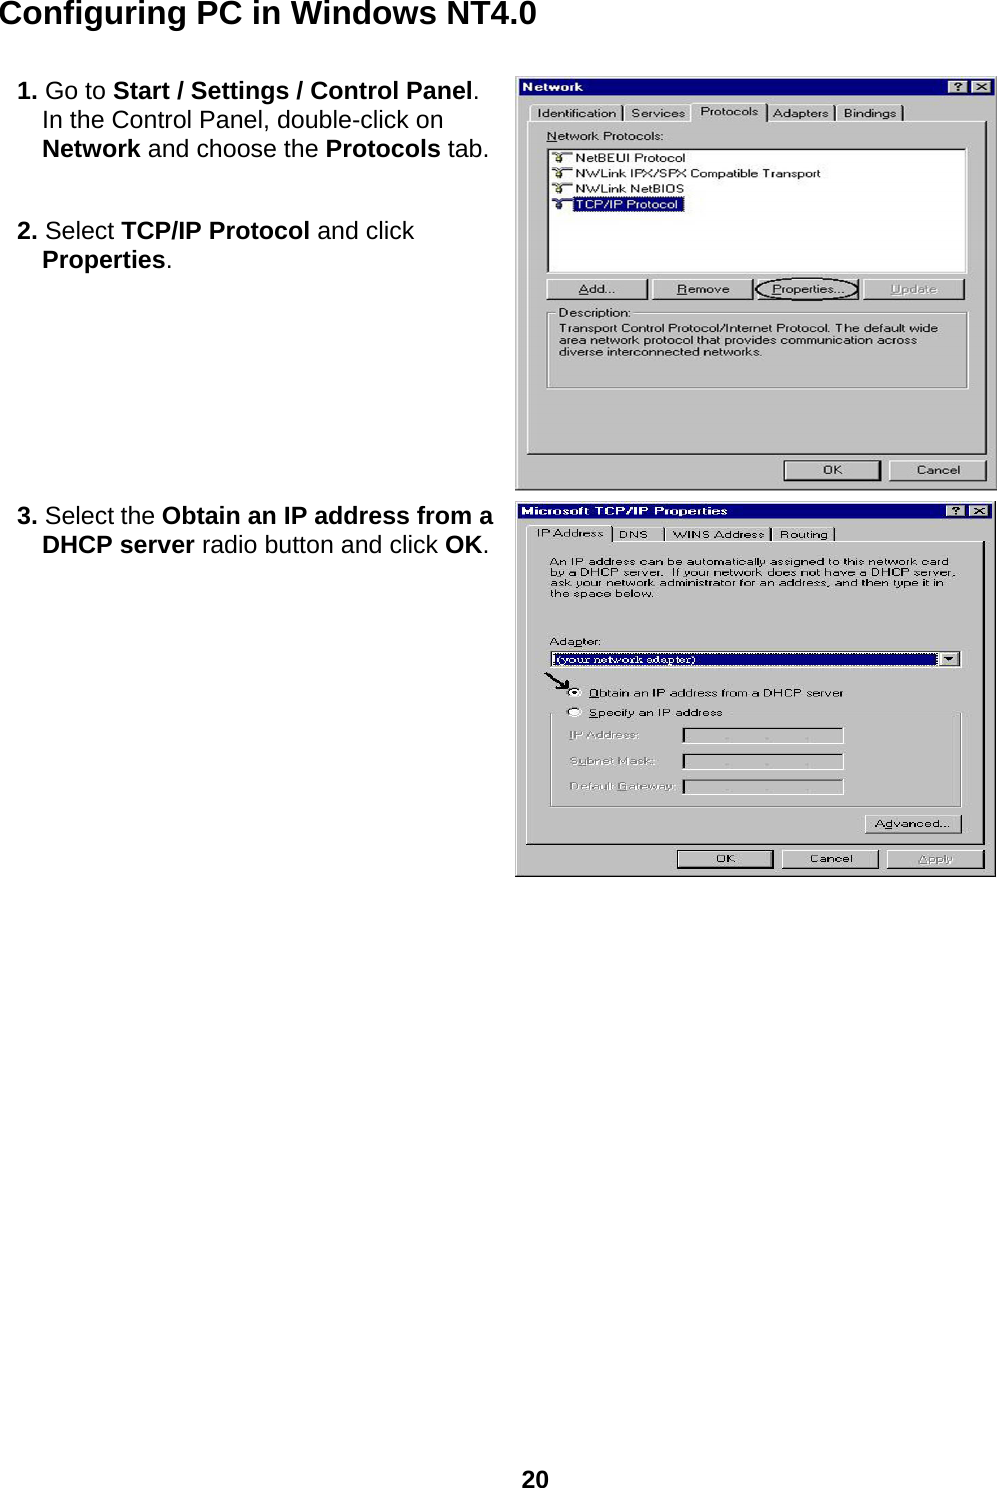  20 Configuring PC in Windows NT4.0  1. Go to Start / Settings / Control Panel. In the Control Panel, double-click on Network and choose the Protocols tab. 2. Select TCP/IP Protocol and click Properties.  3. Select the Obtain an IP address from a DHCP server radio button and click OK.   